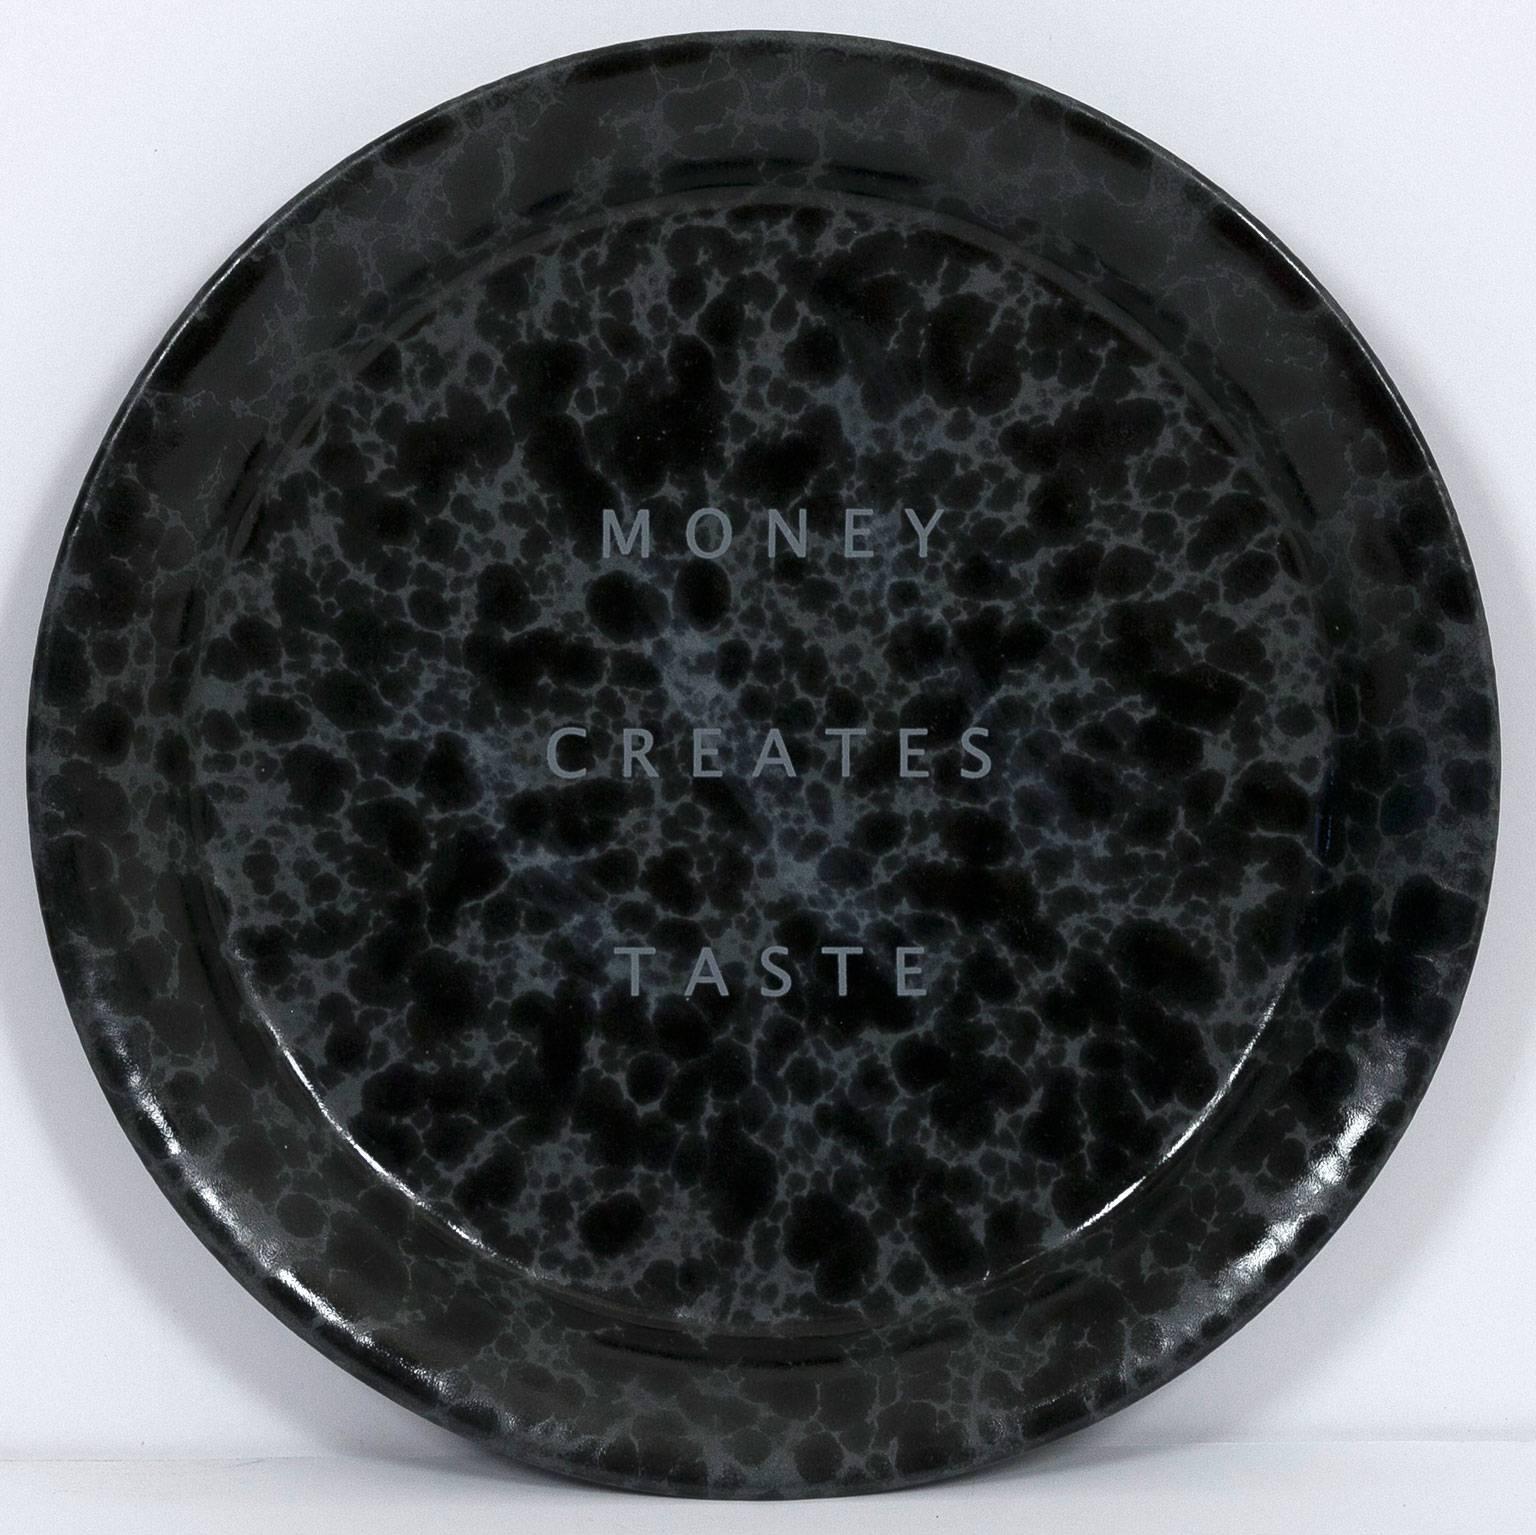 Ceramic Chargers - Abstract Print by Jenny Holzer